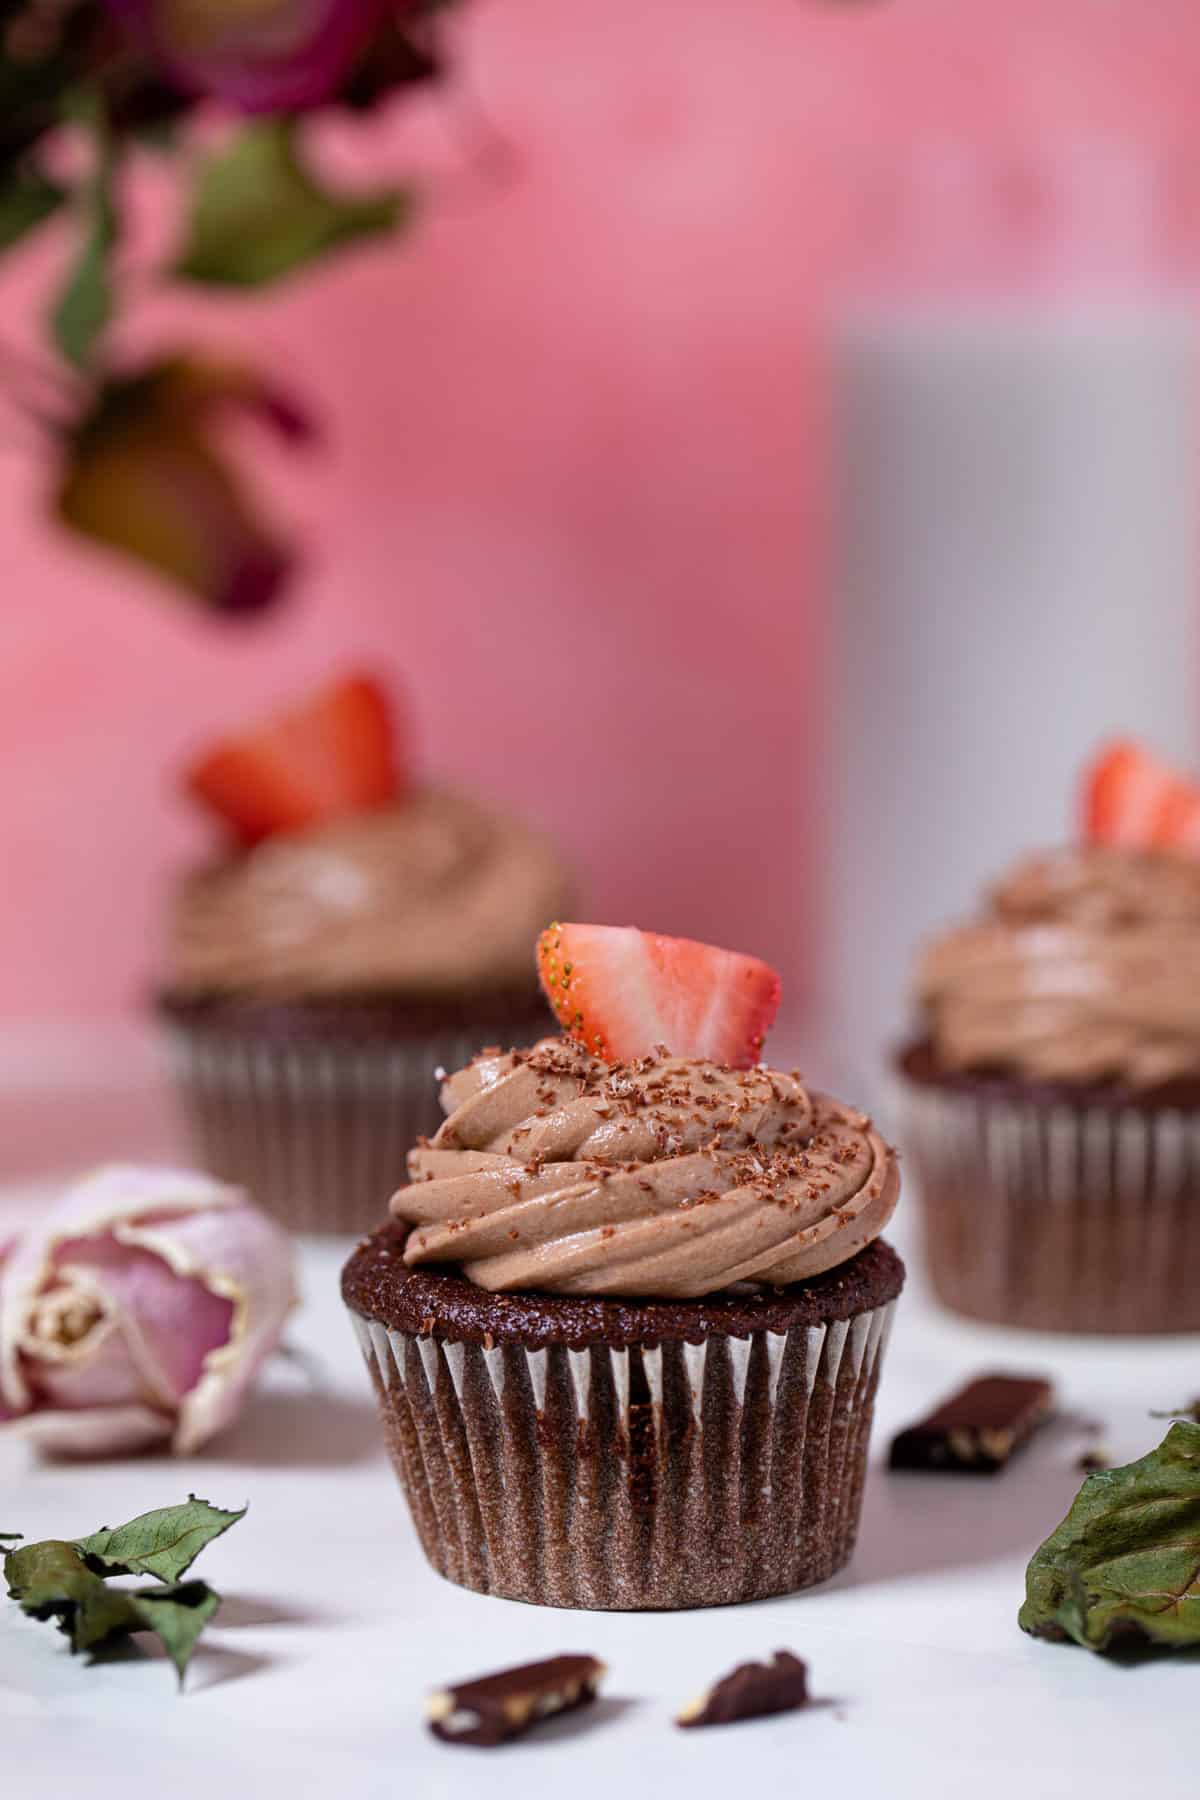 Bailey’s Chocolate Cupcakes topped with halved strawberries.